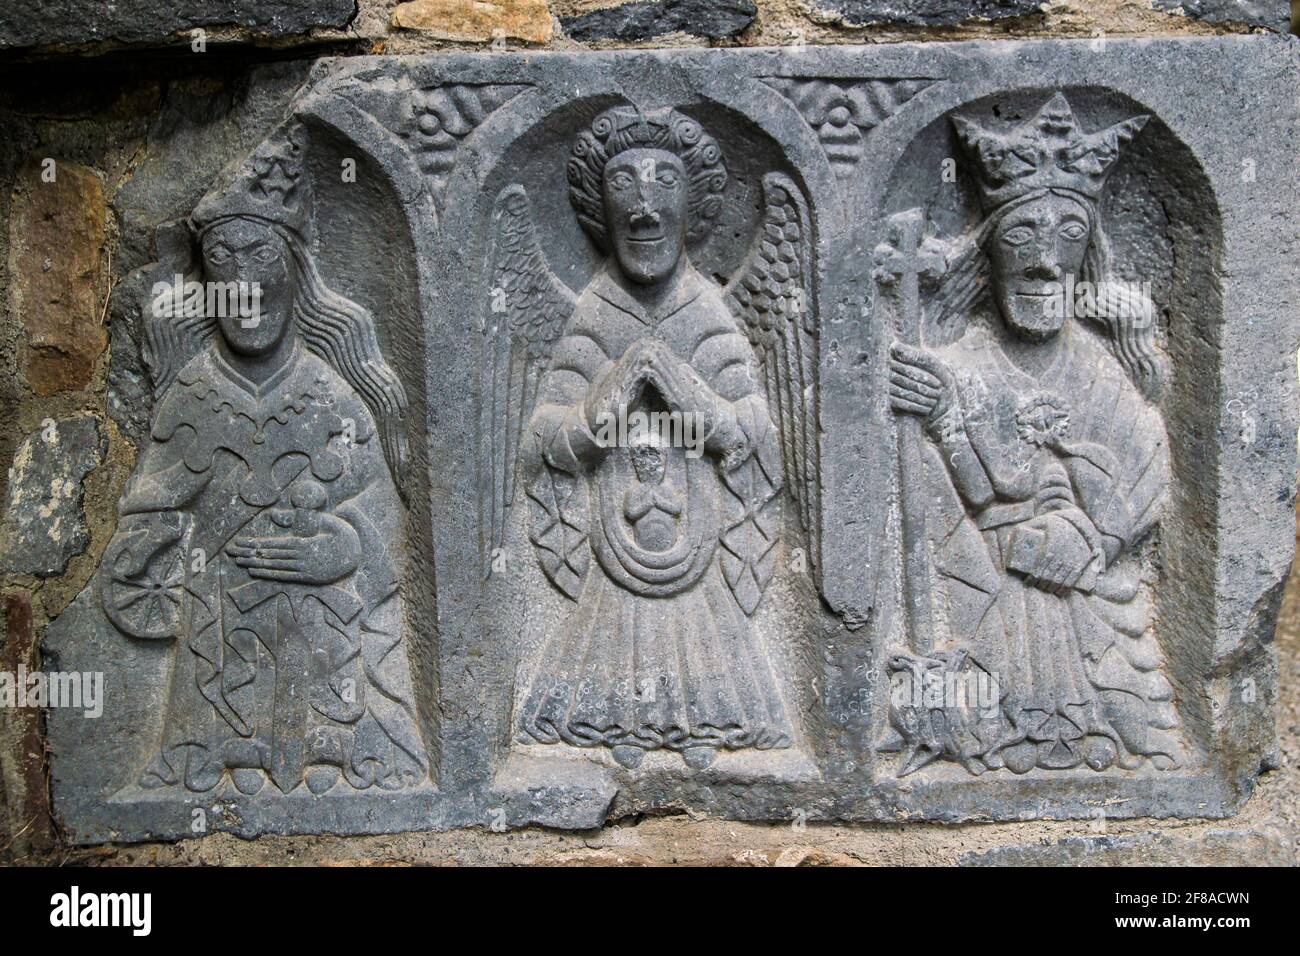 Stone carving of three religious figures on wall of ruins in Ireland Stock Photo